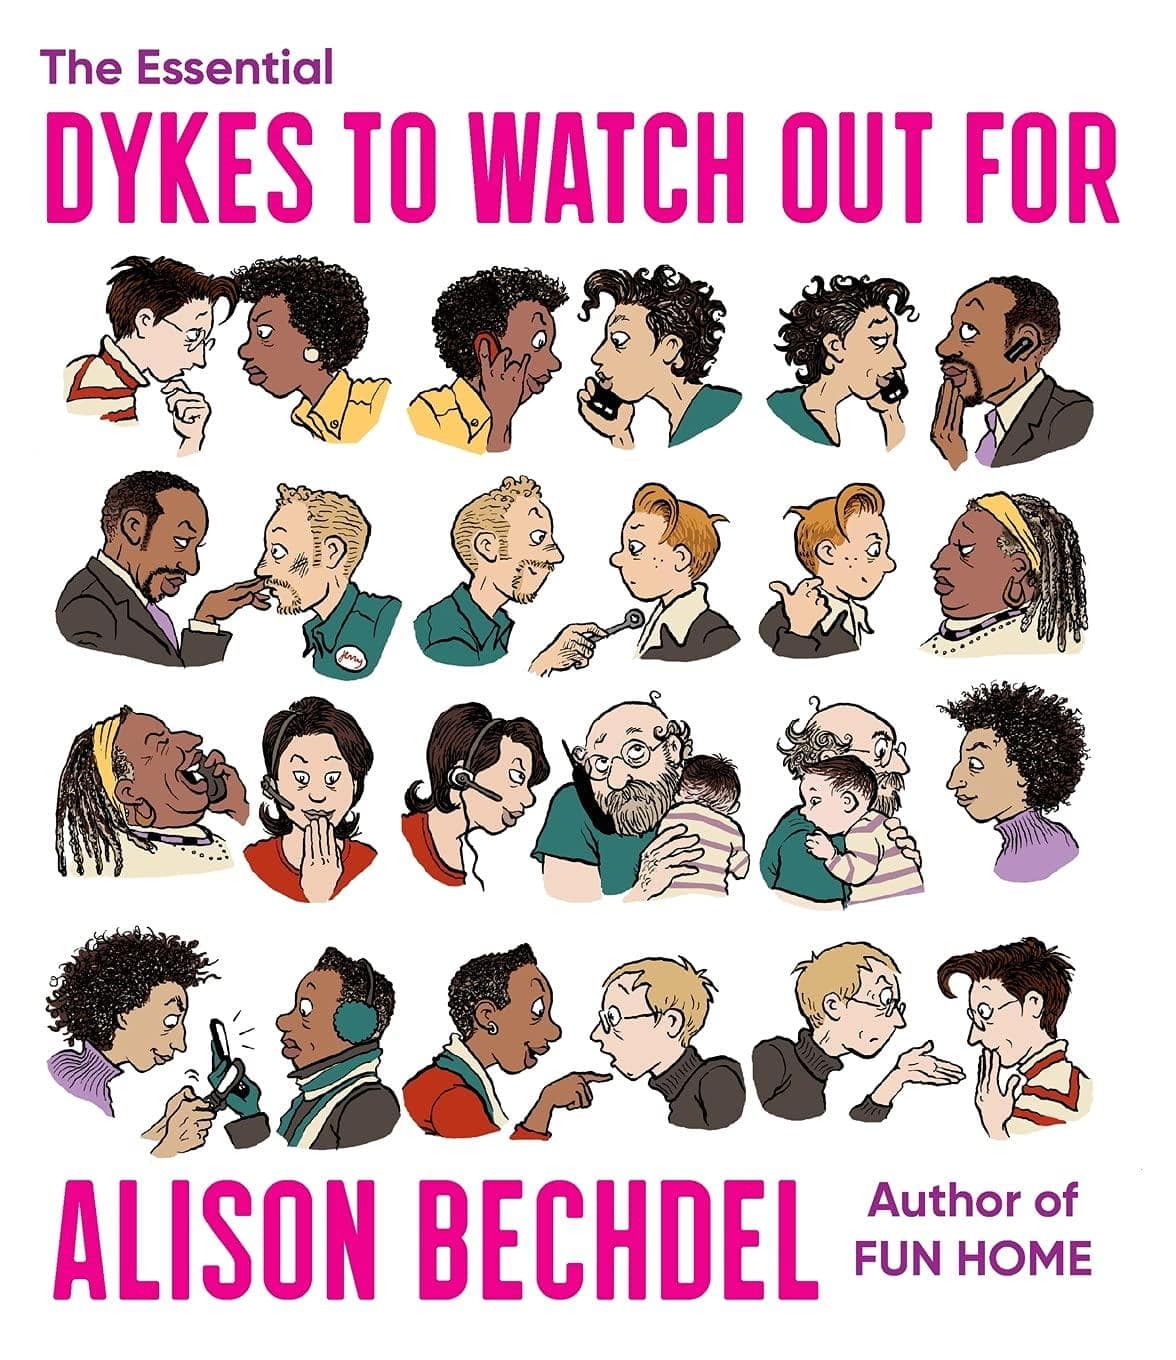 The Essential Dykes to Watch Out For - SureShot Books Publishing LLC